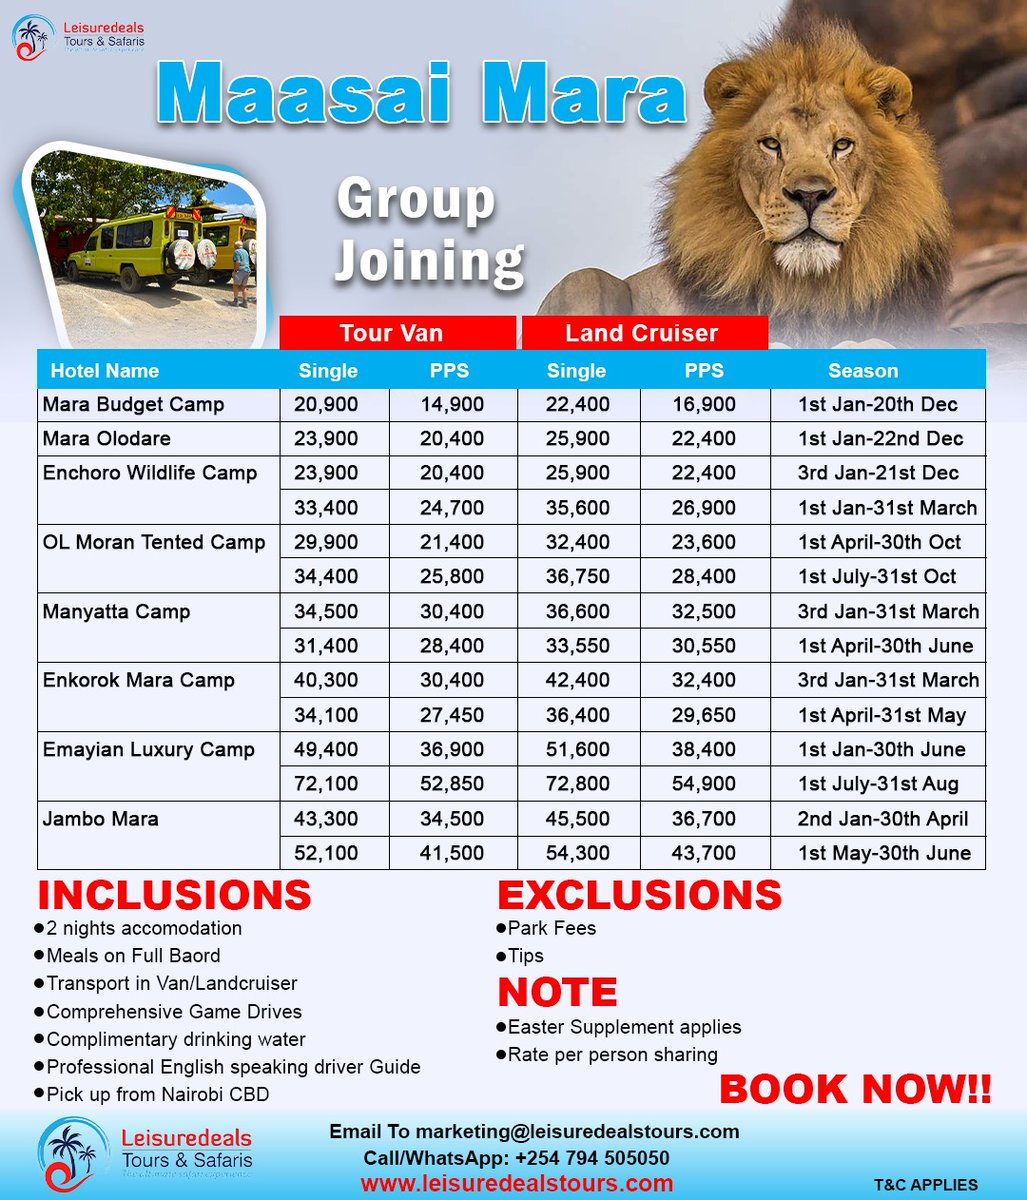 Book the Best Holiday Packages, adventurous & pocket friendly. For 3 days and 2 nights using a Landcruiser/Tour Van. 

#Leisuredealstours #lipapolepole #masaimara2024rates #bushholidaypackages #safarivacation #wildlifeadventure